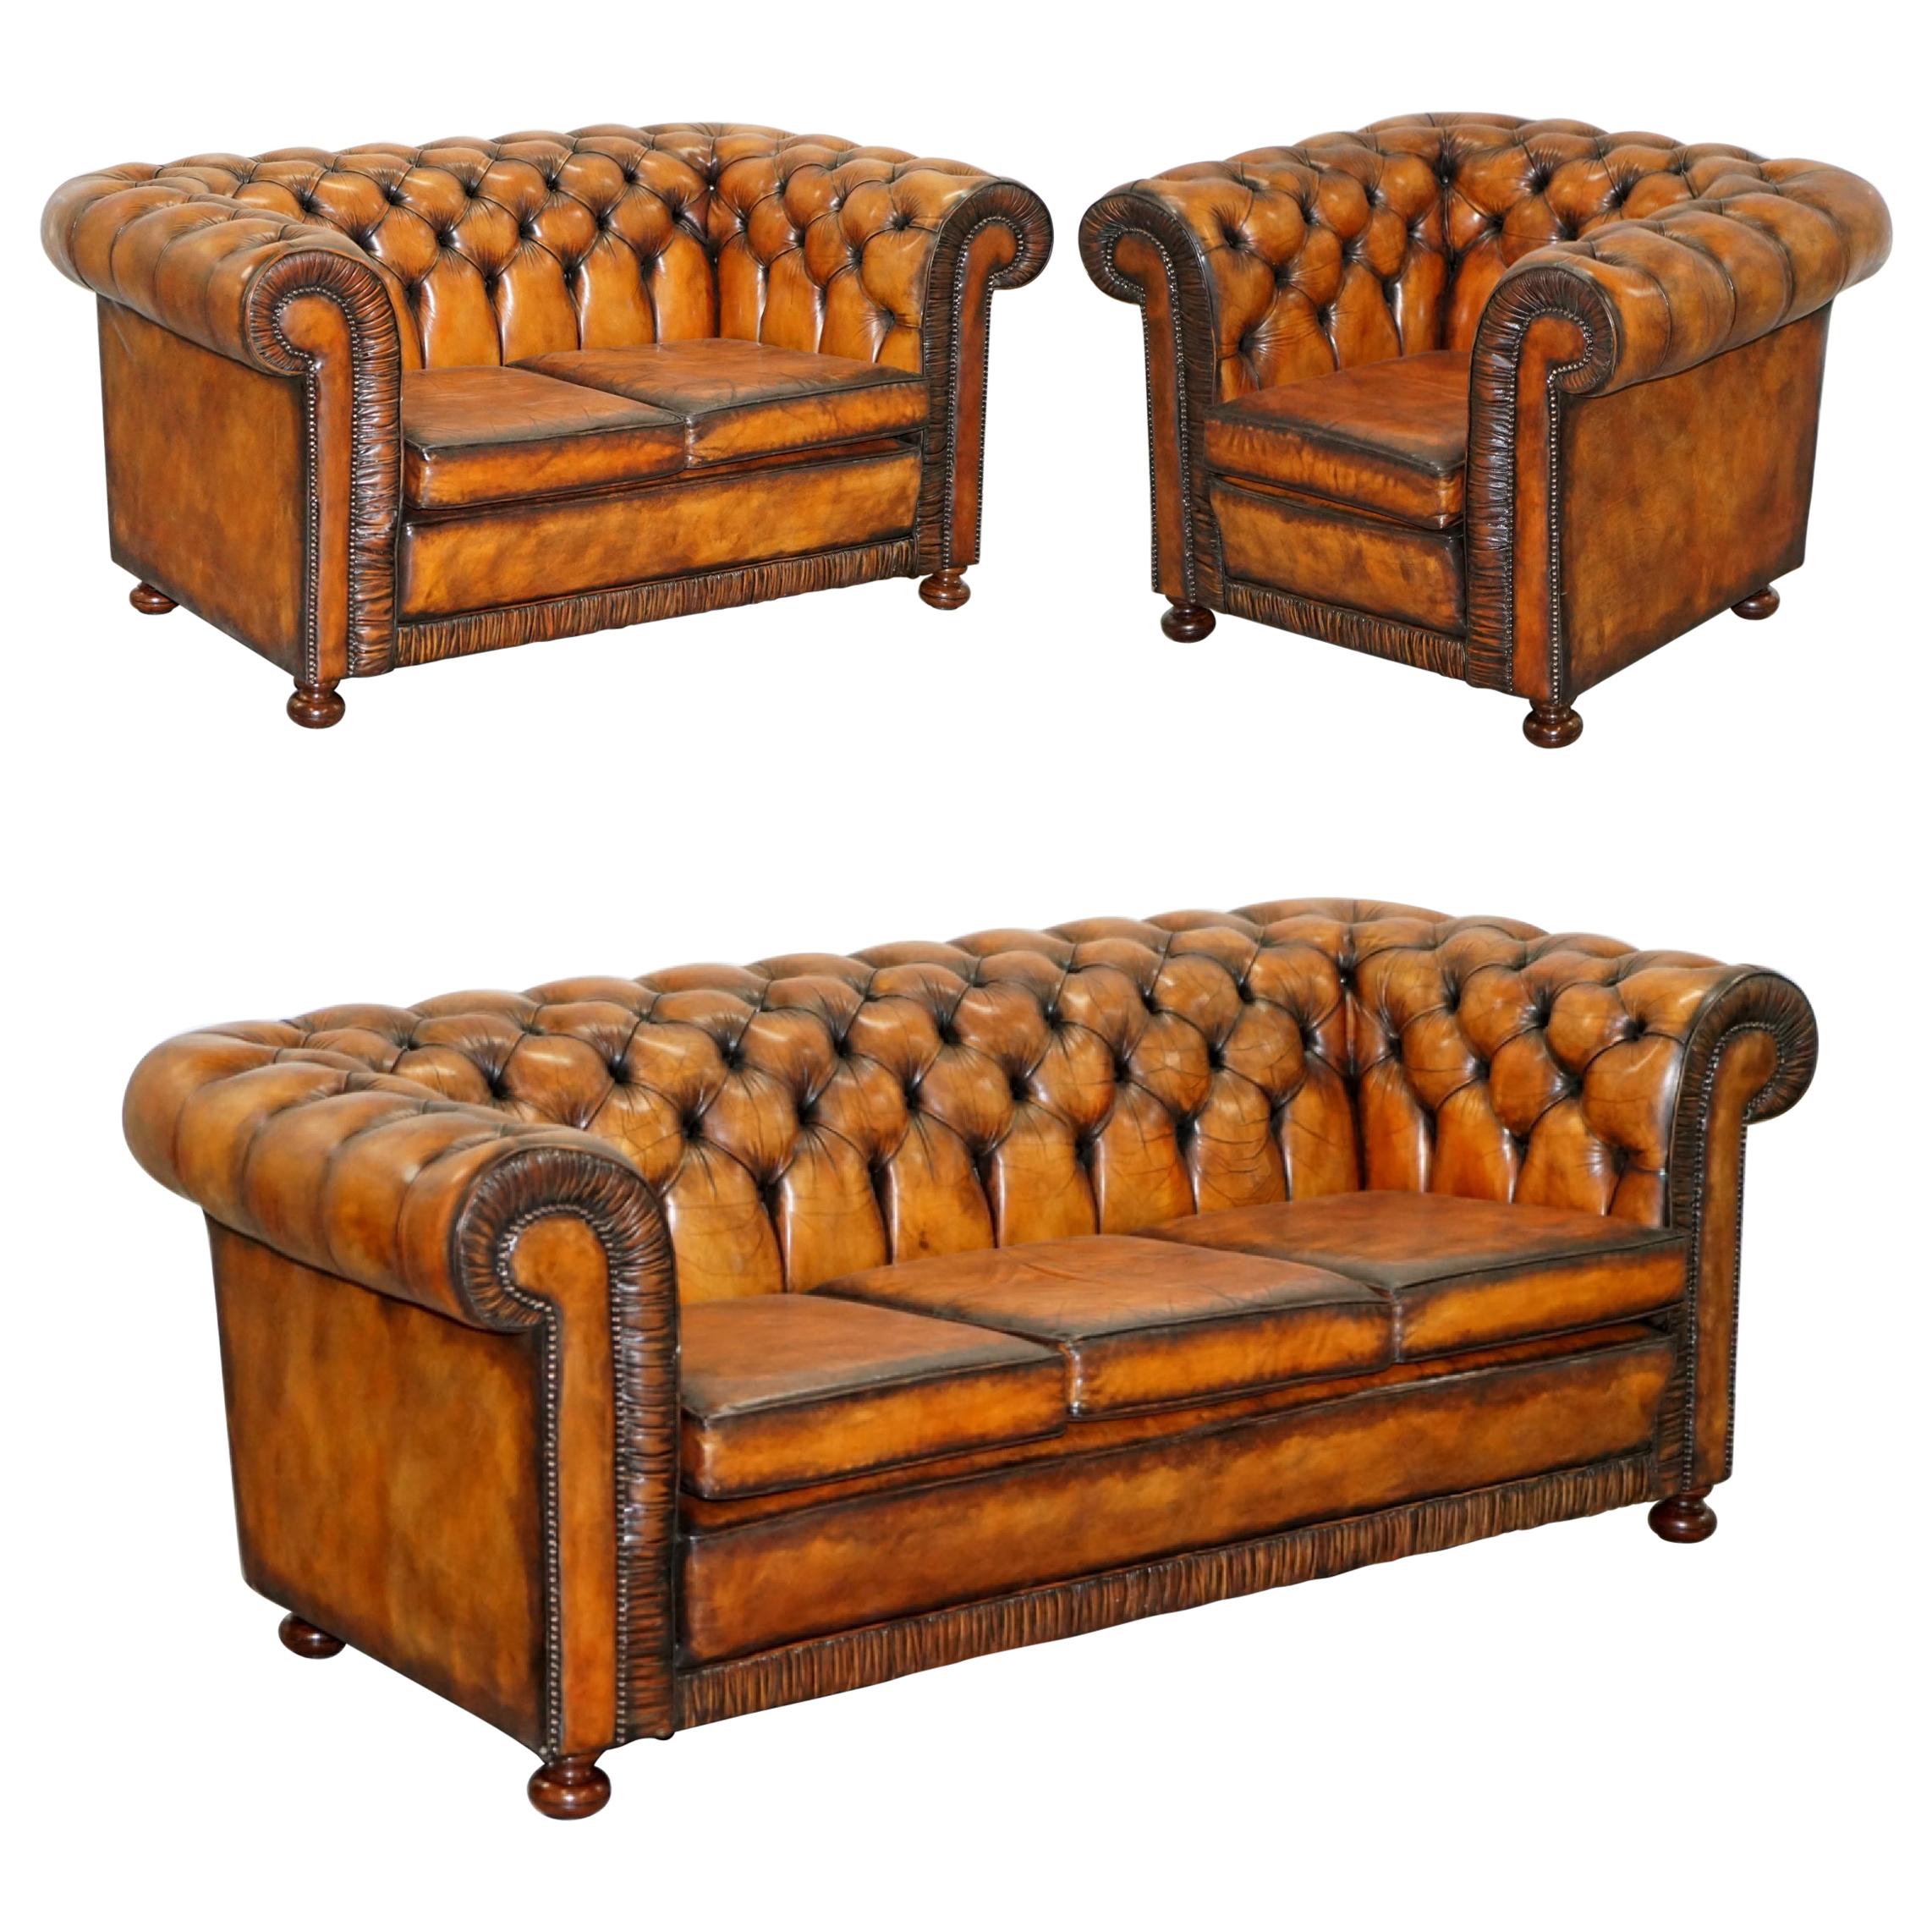 Vintage Restored Brown Leather Chesterfield Library Club Armchair and Sofa Suite